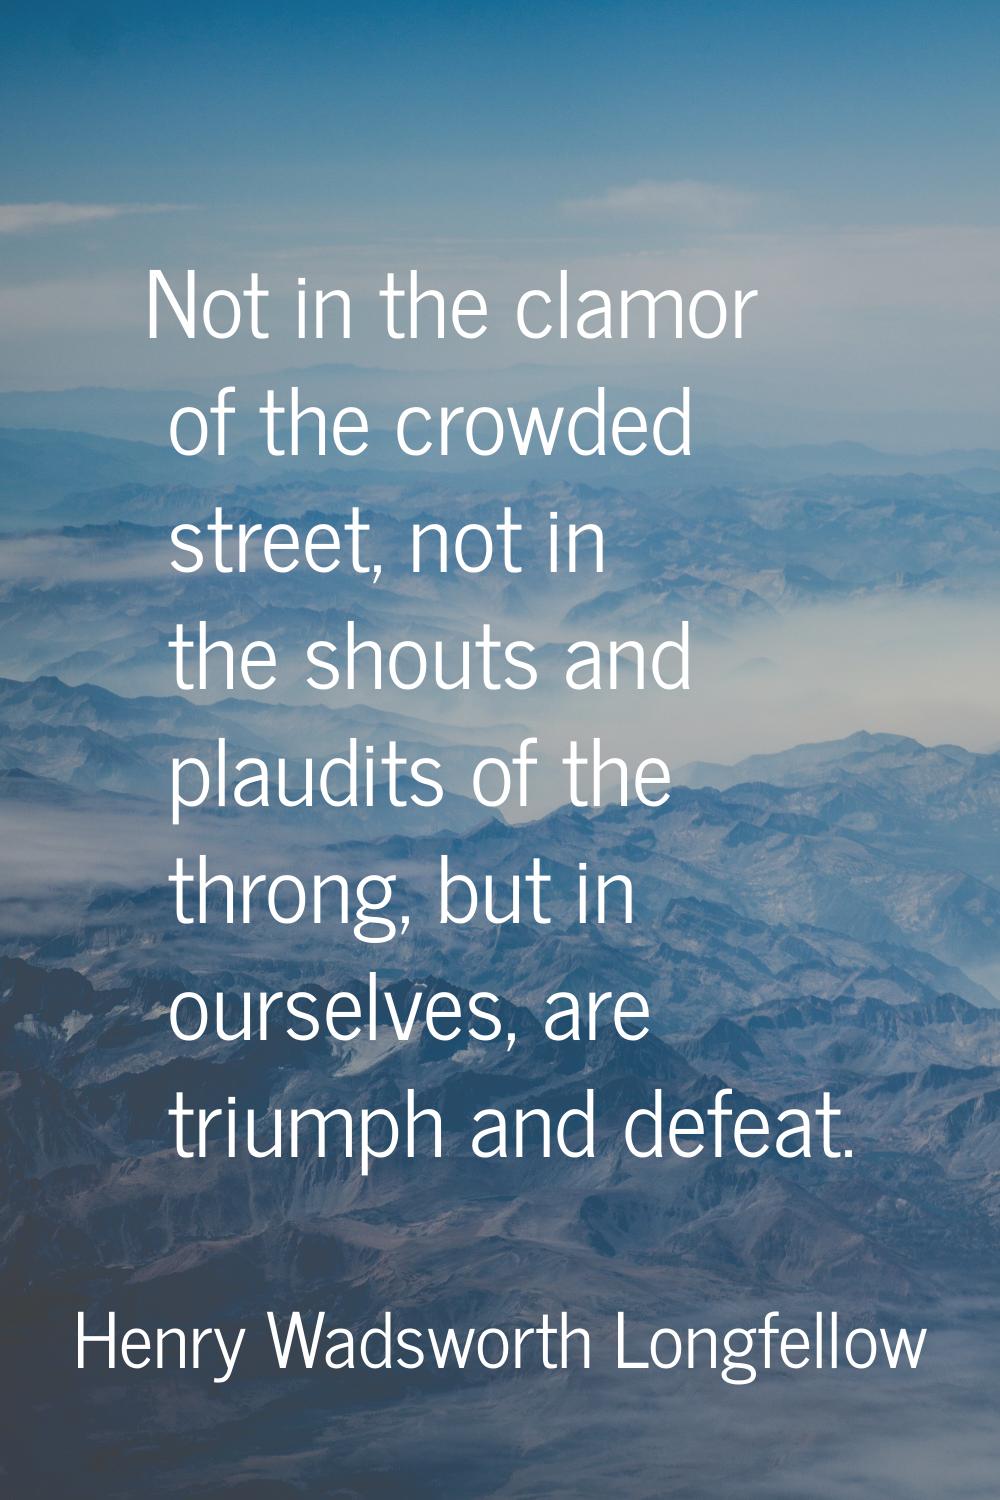 Not in the clamor of the crowded street, not in the shouts and plaudits of the throng, but in ourse